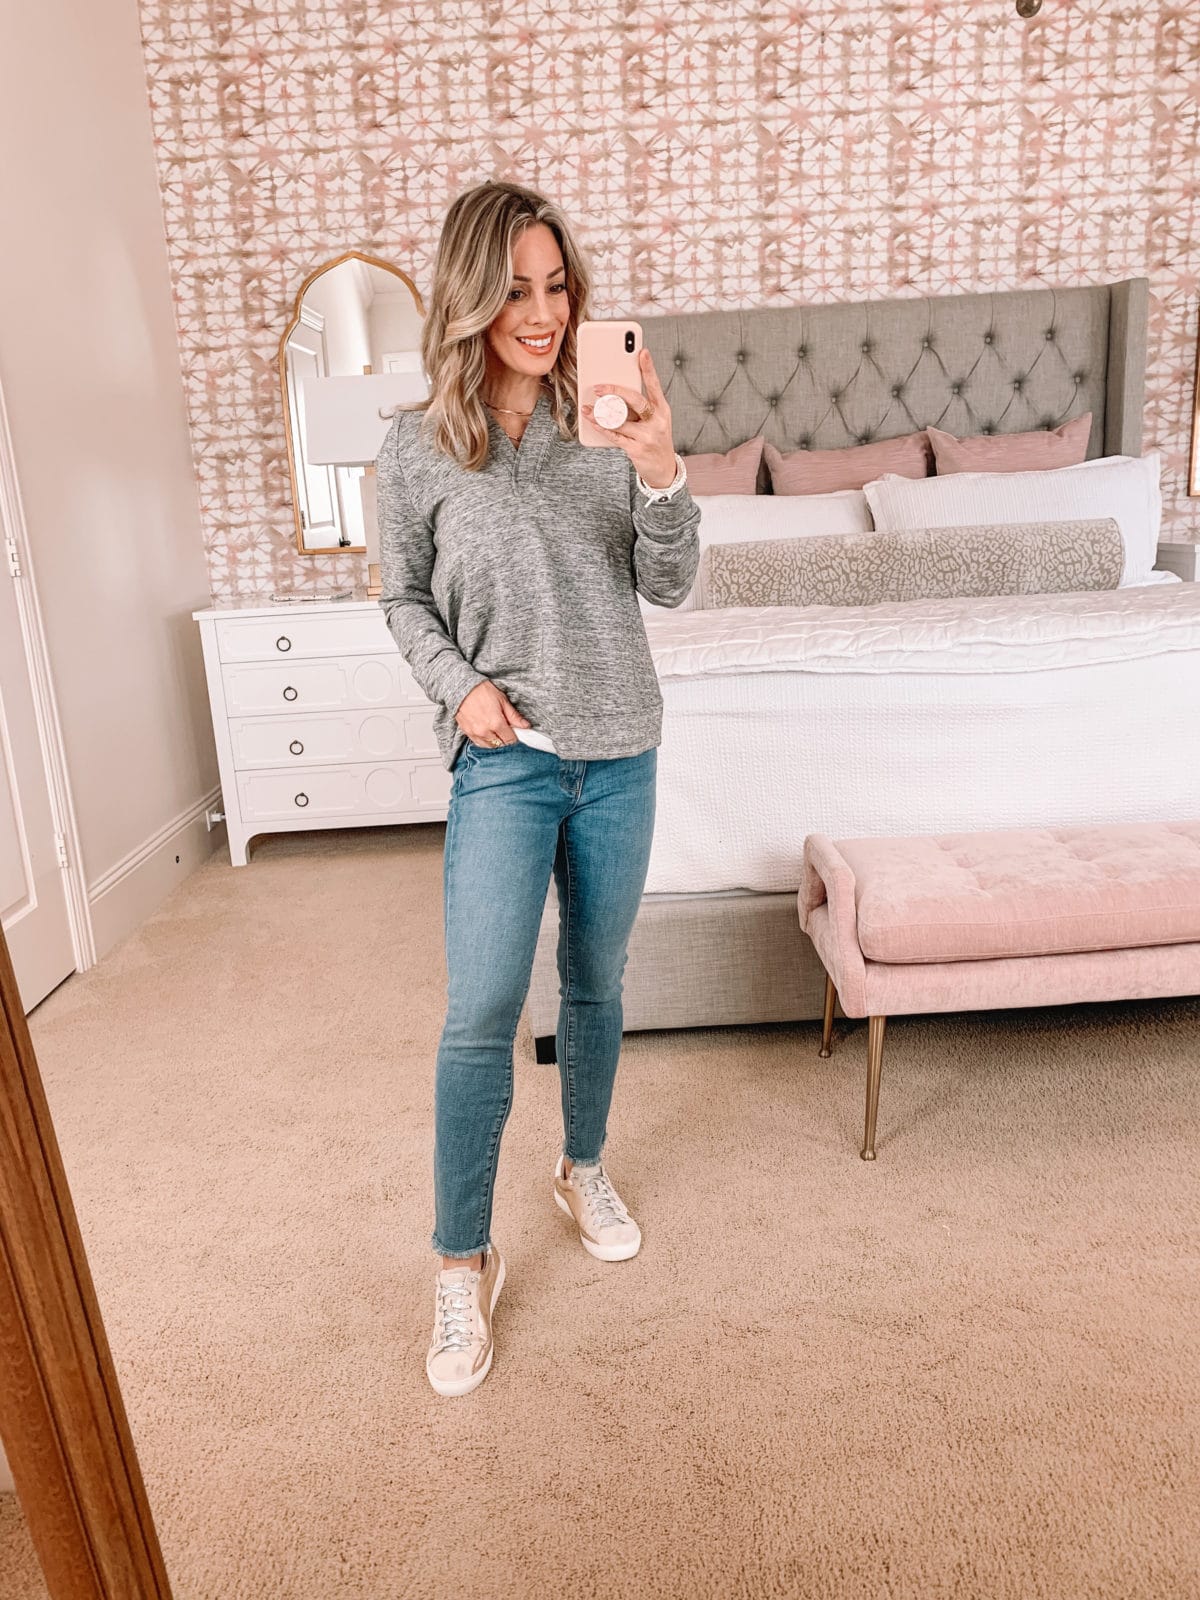 Amazon Fashion Faves, Pullover, Goodthreads Jeans, Sneakers 